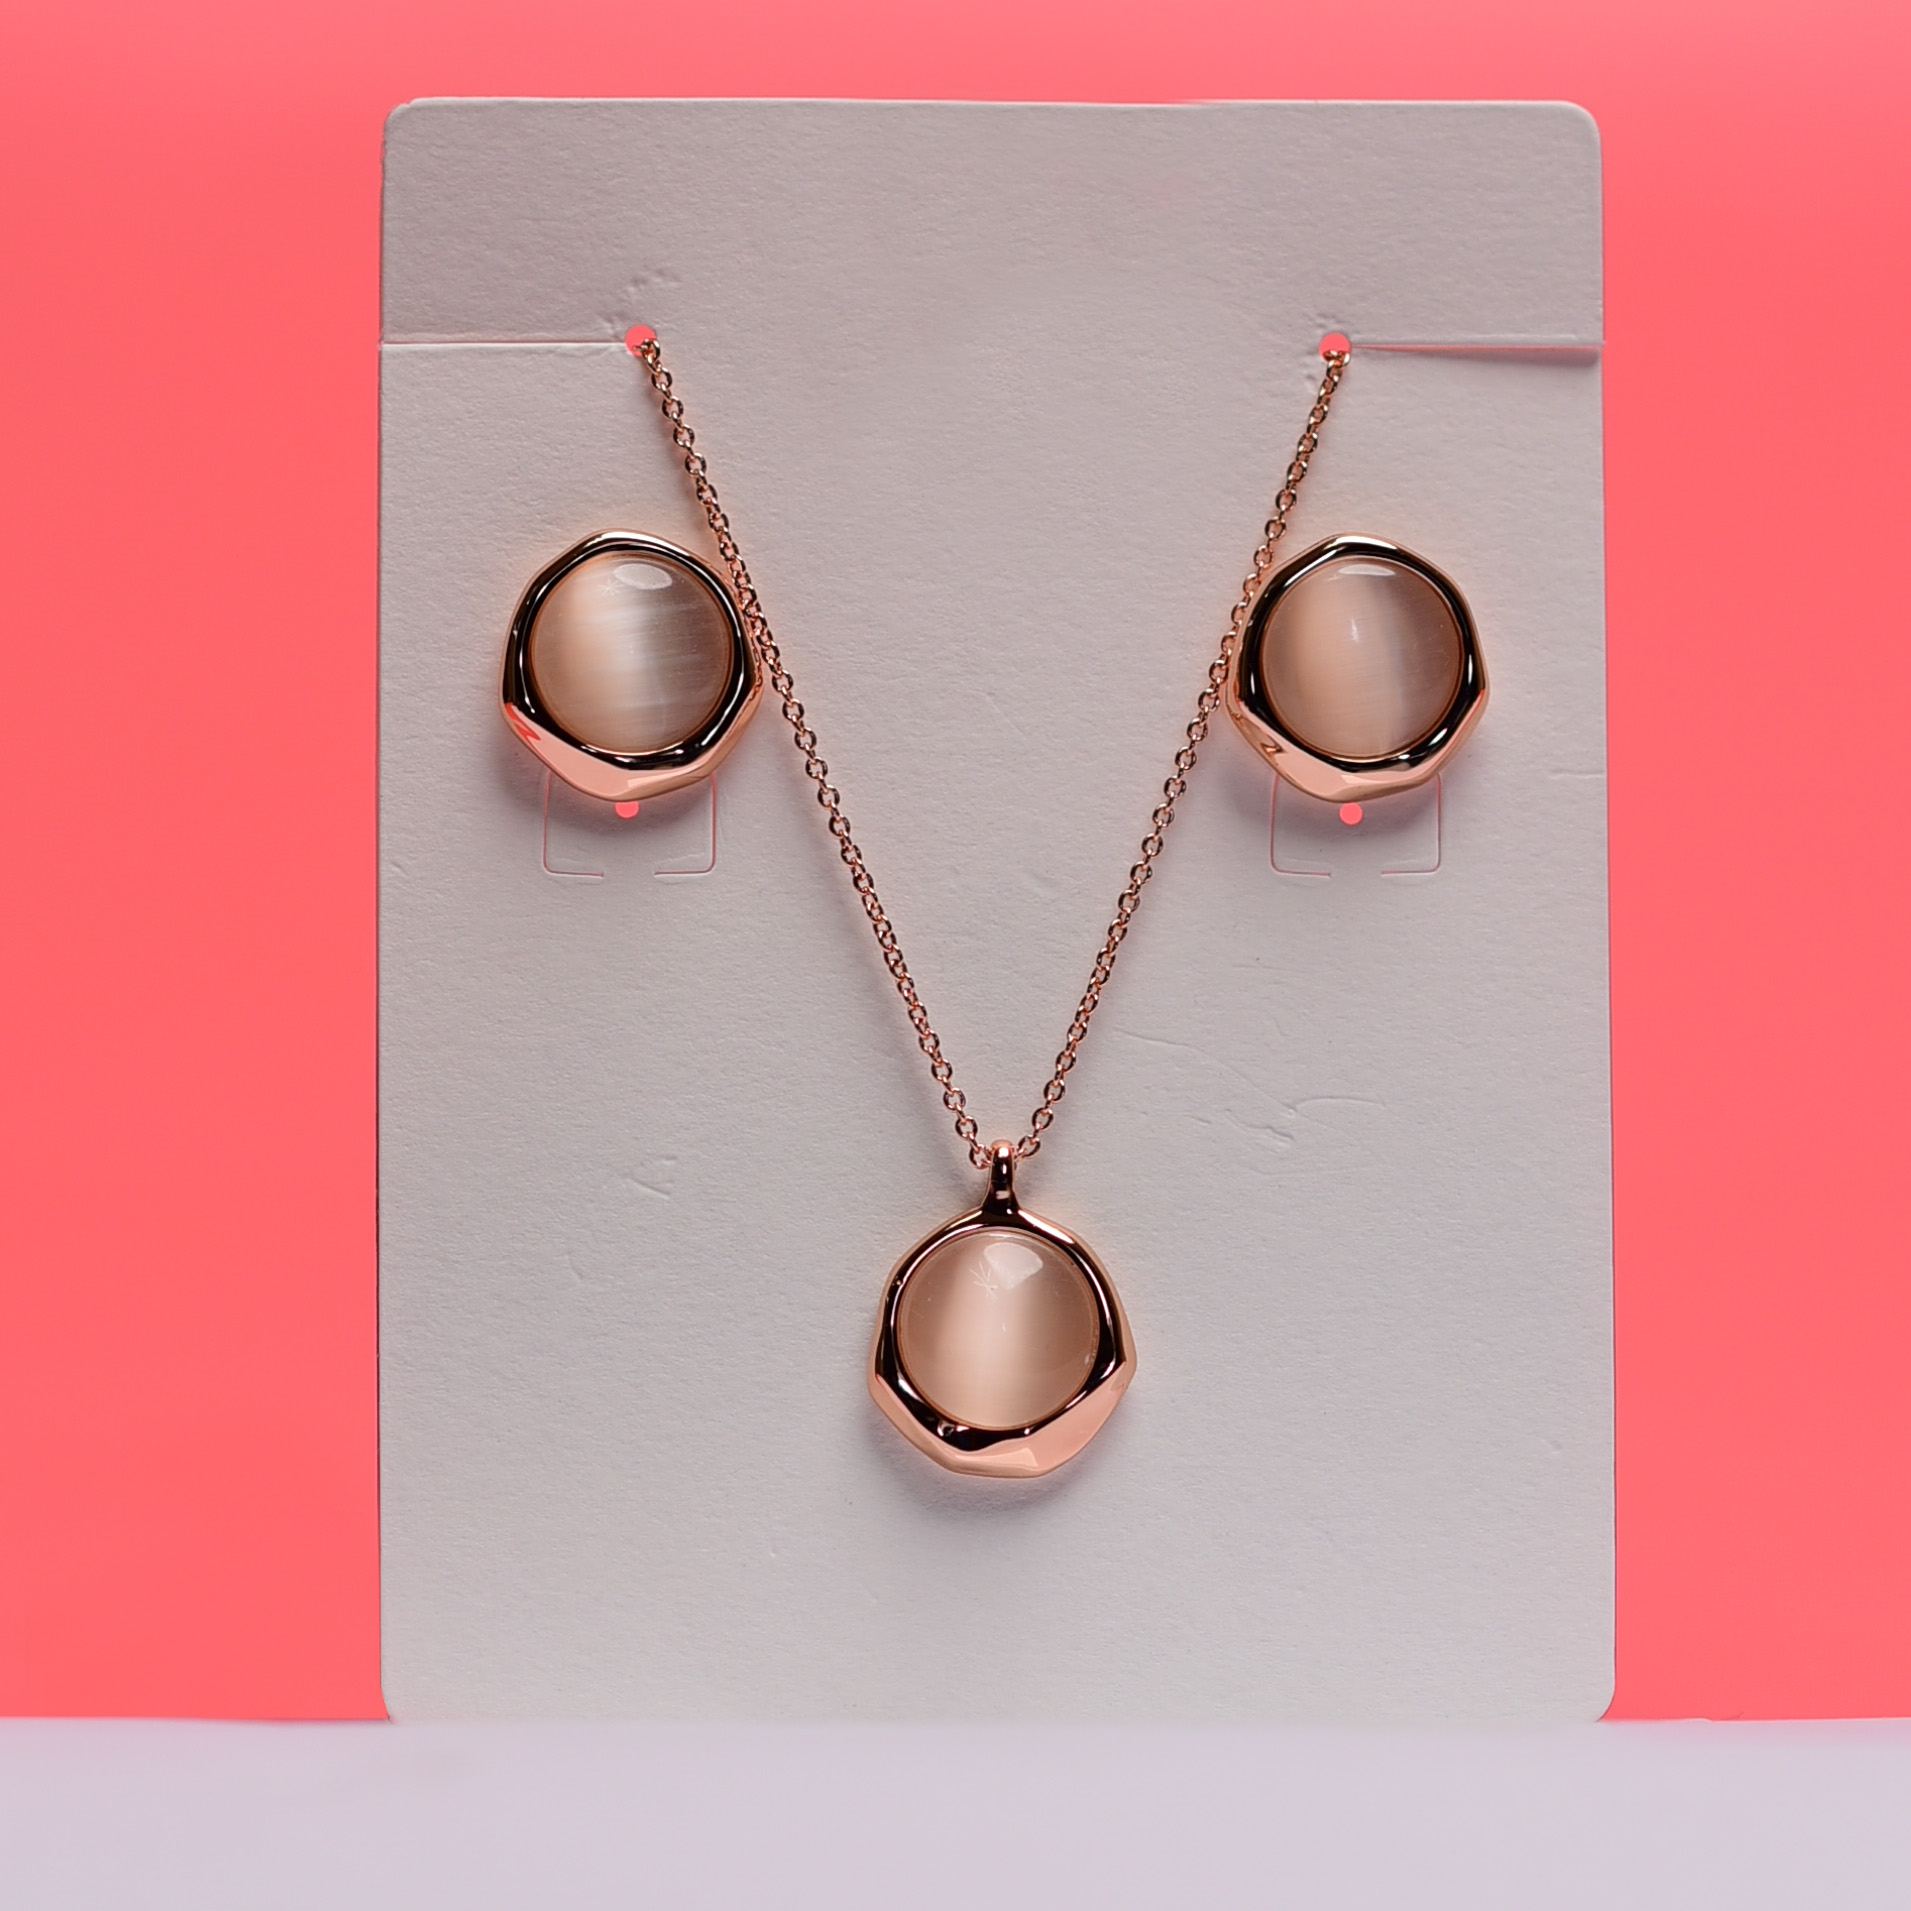 Rose gold, necklace / earrings sets